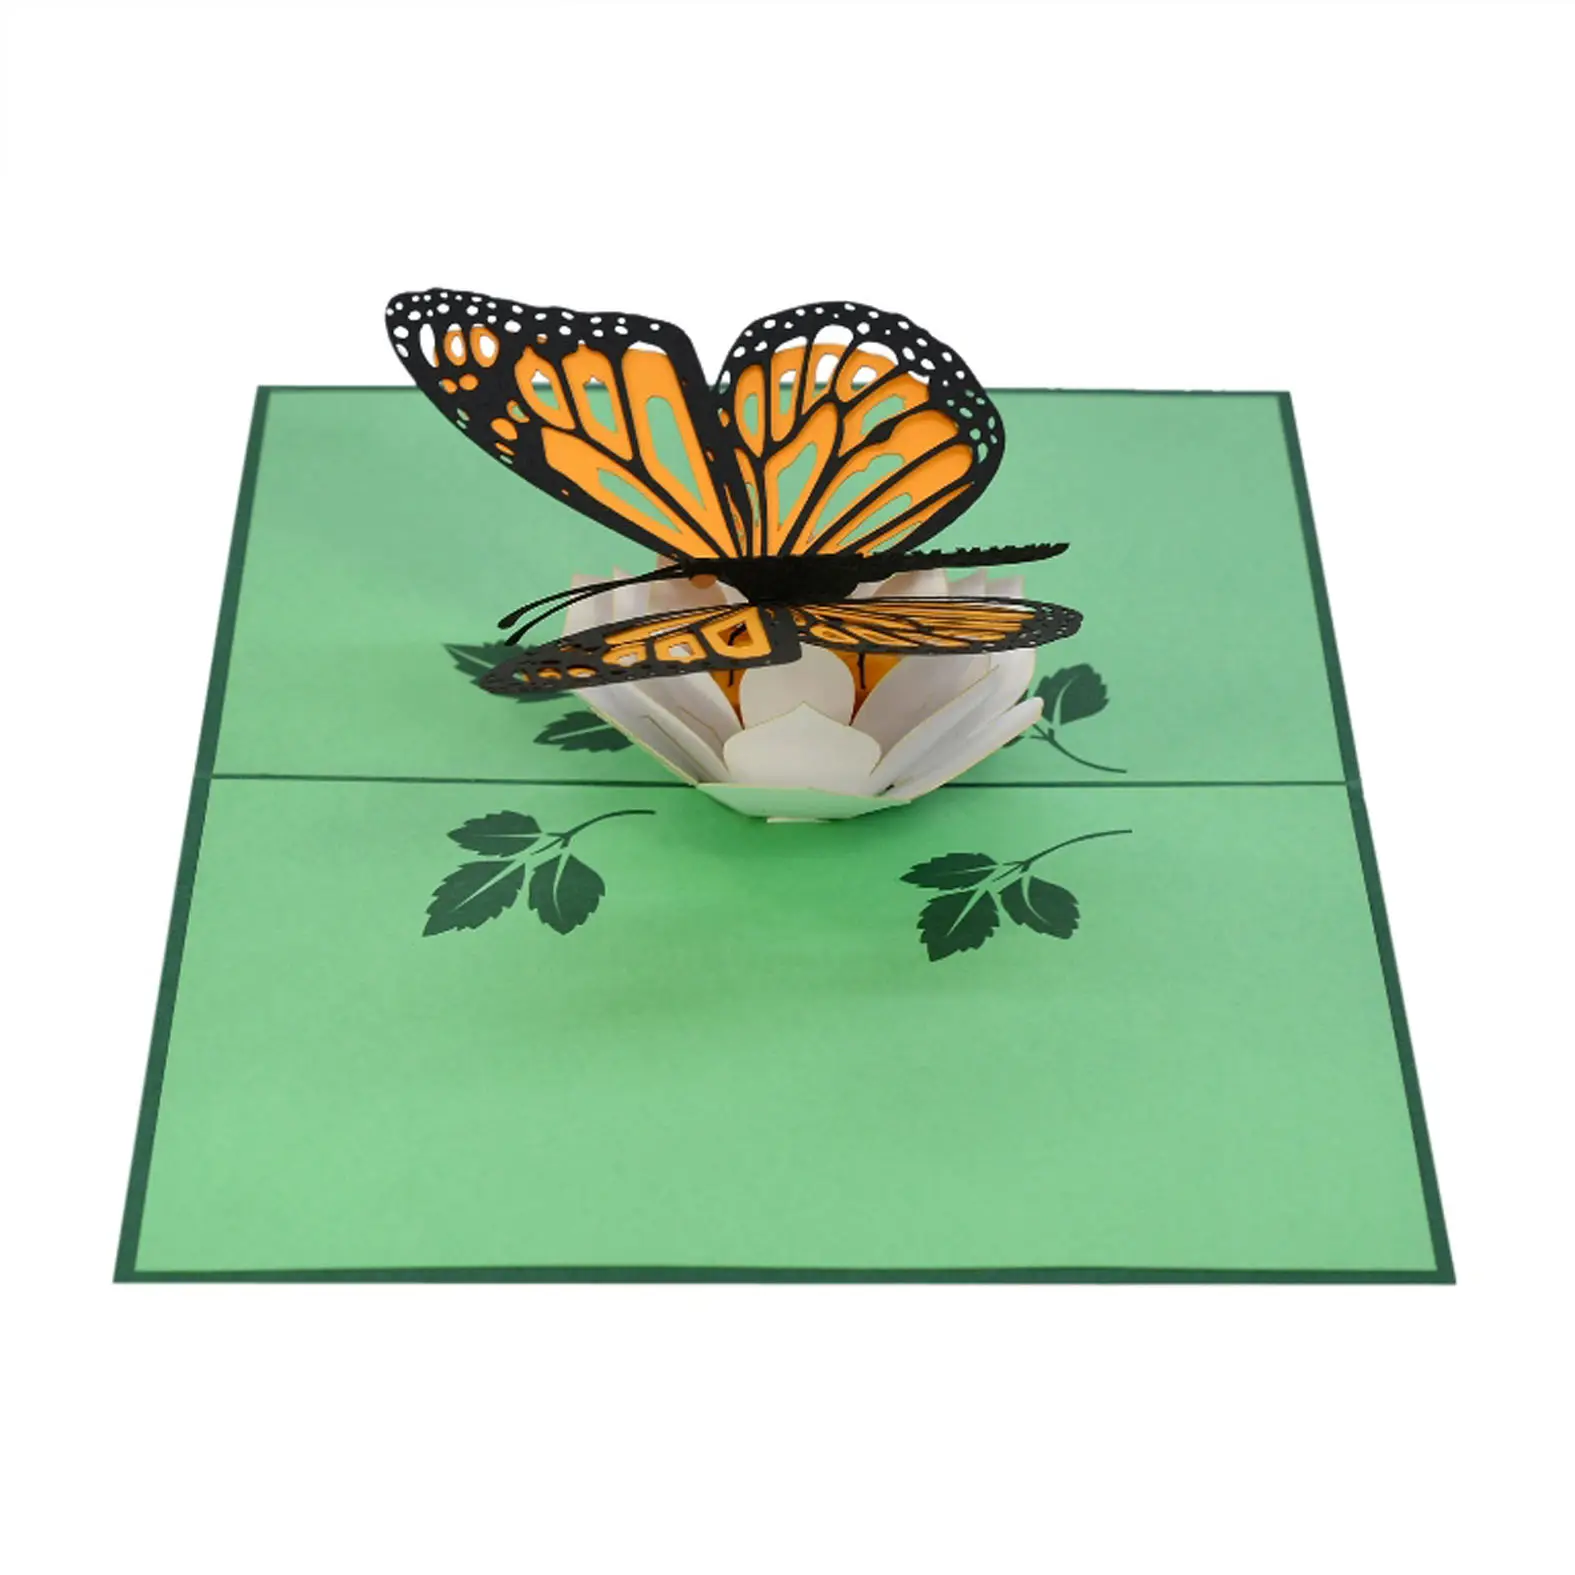 New butterfly 3D animal greeting cards for Birthday of wife or girlfriend Wholesale from Vietnam HMG popup paper